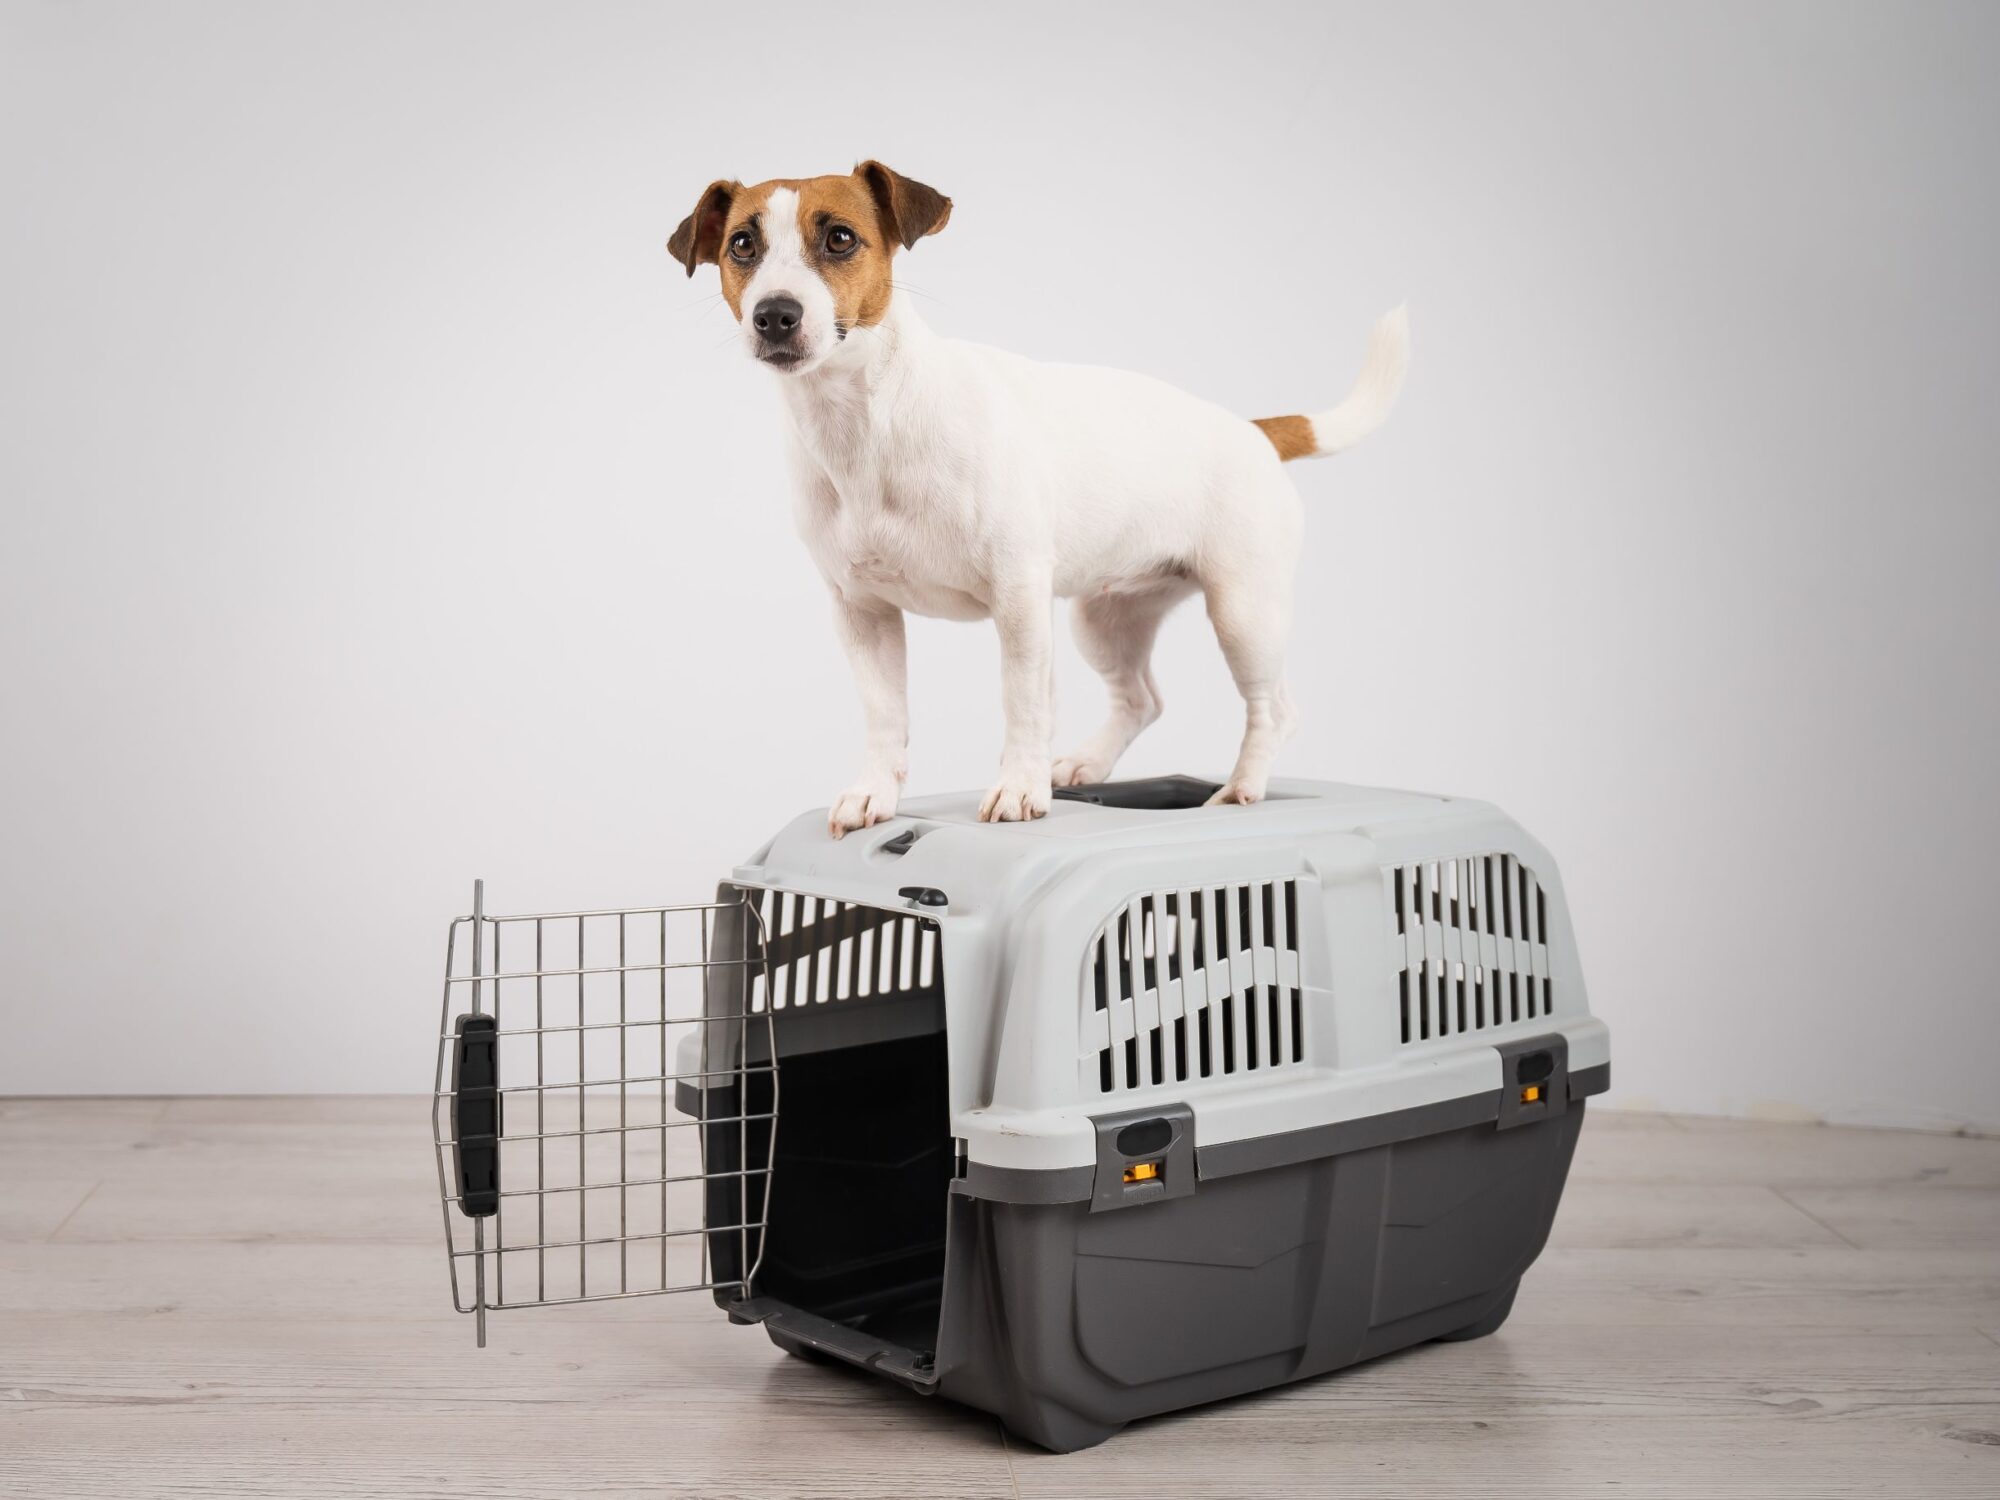 dog standing on travel crate.